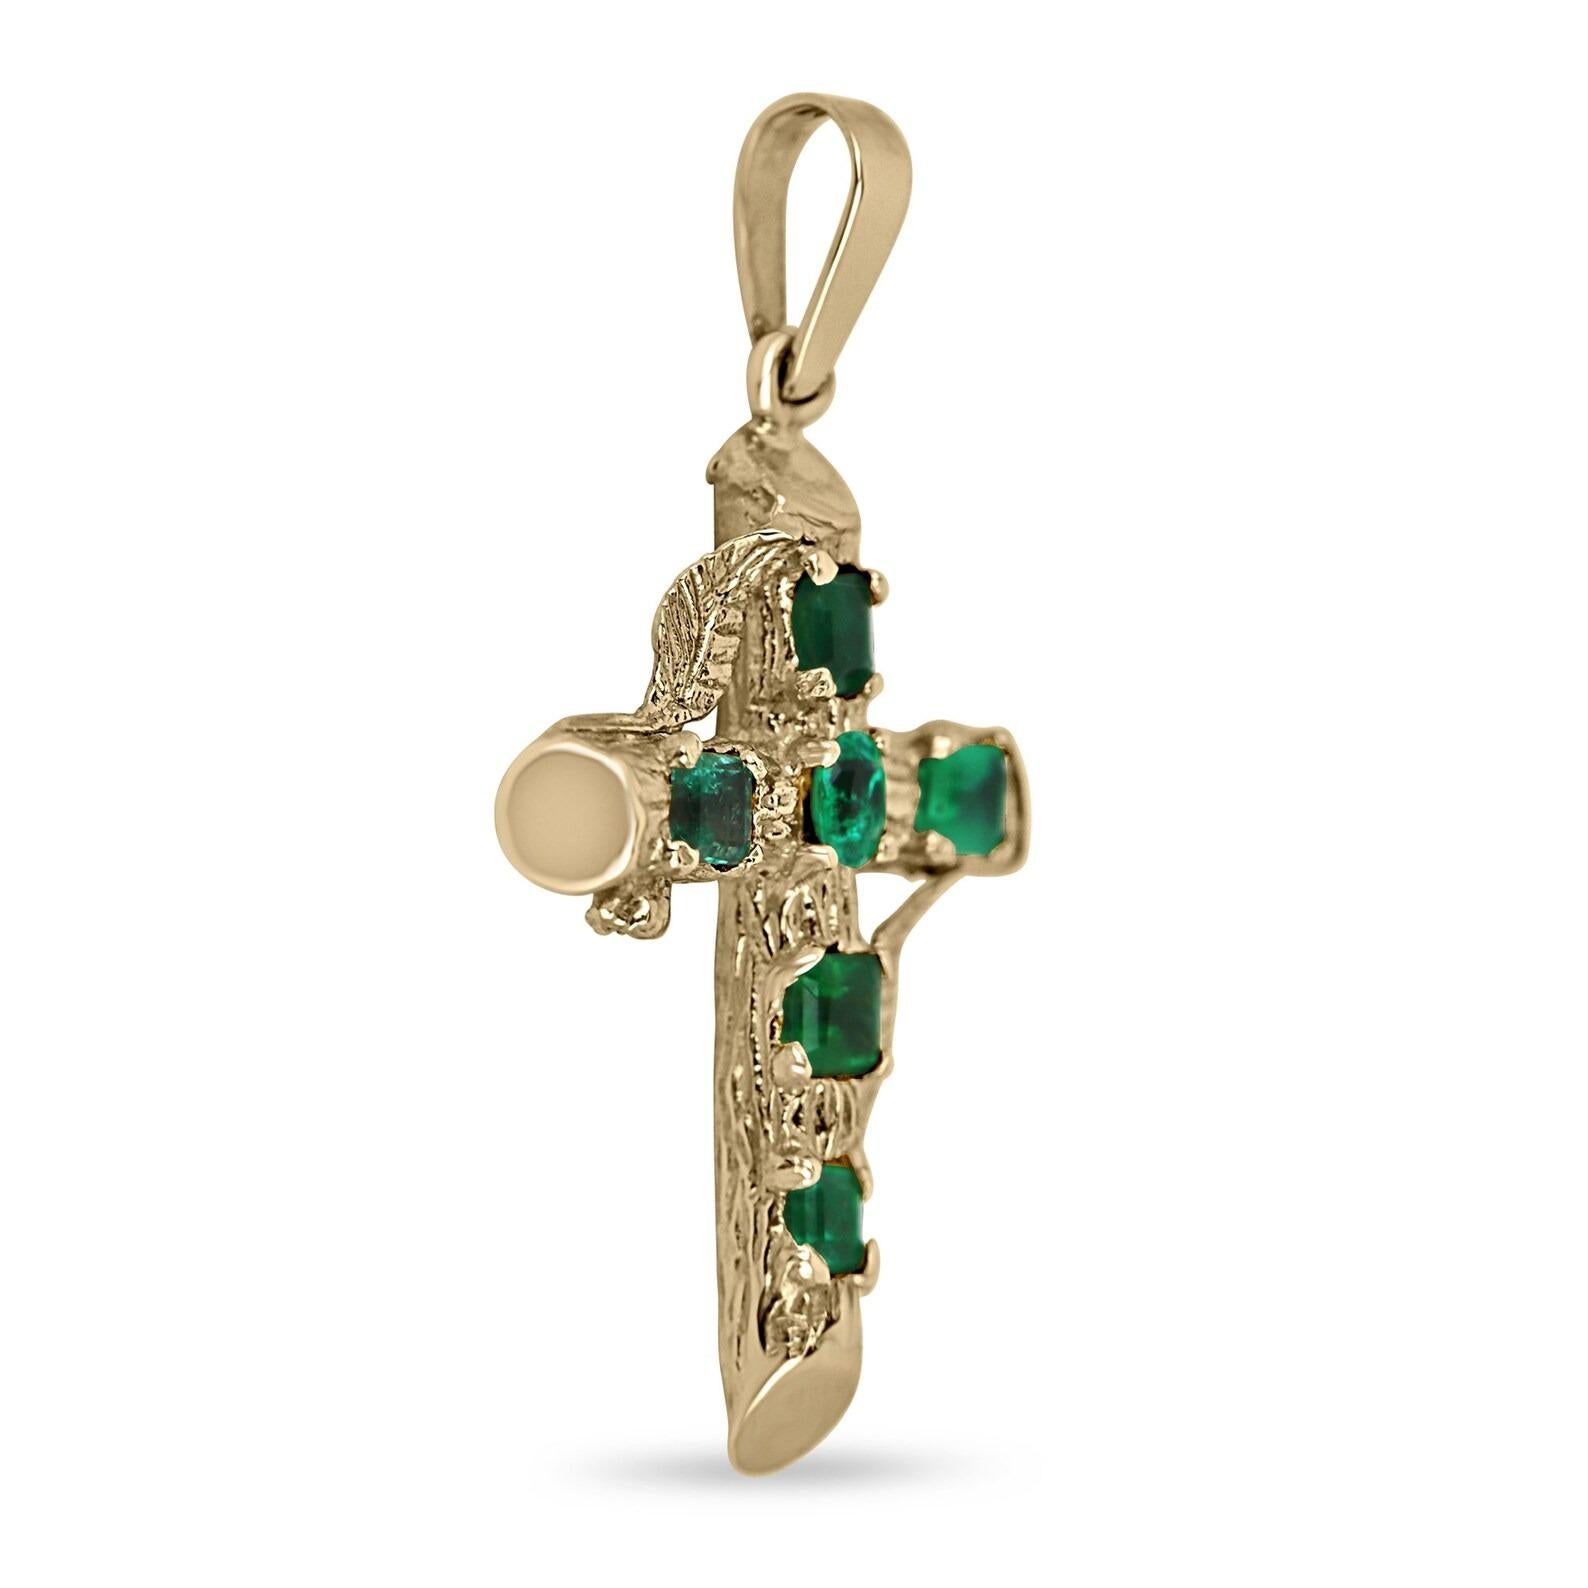 A stunning, natural deep green emerald gold cross. This remarkable piece features six, earth-mined emeralds. Gorgeous mixed shapes like emerald cut, asscher and a center set oval cut emerald. All gemstones showcase an excellent shine and vivid dark